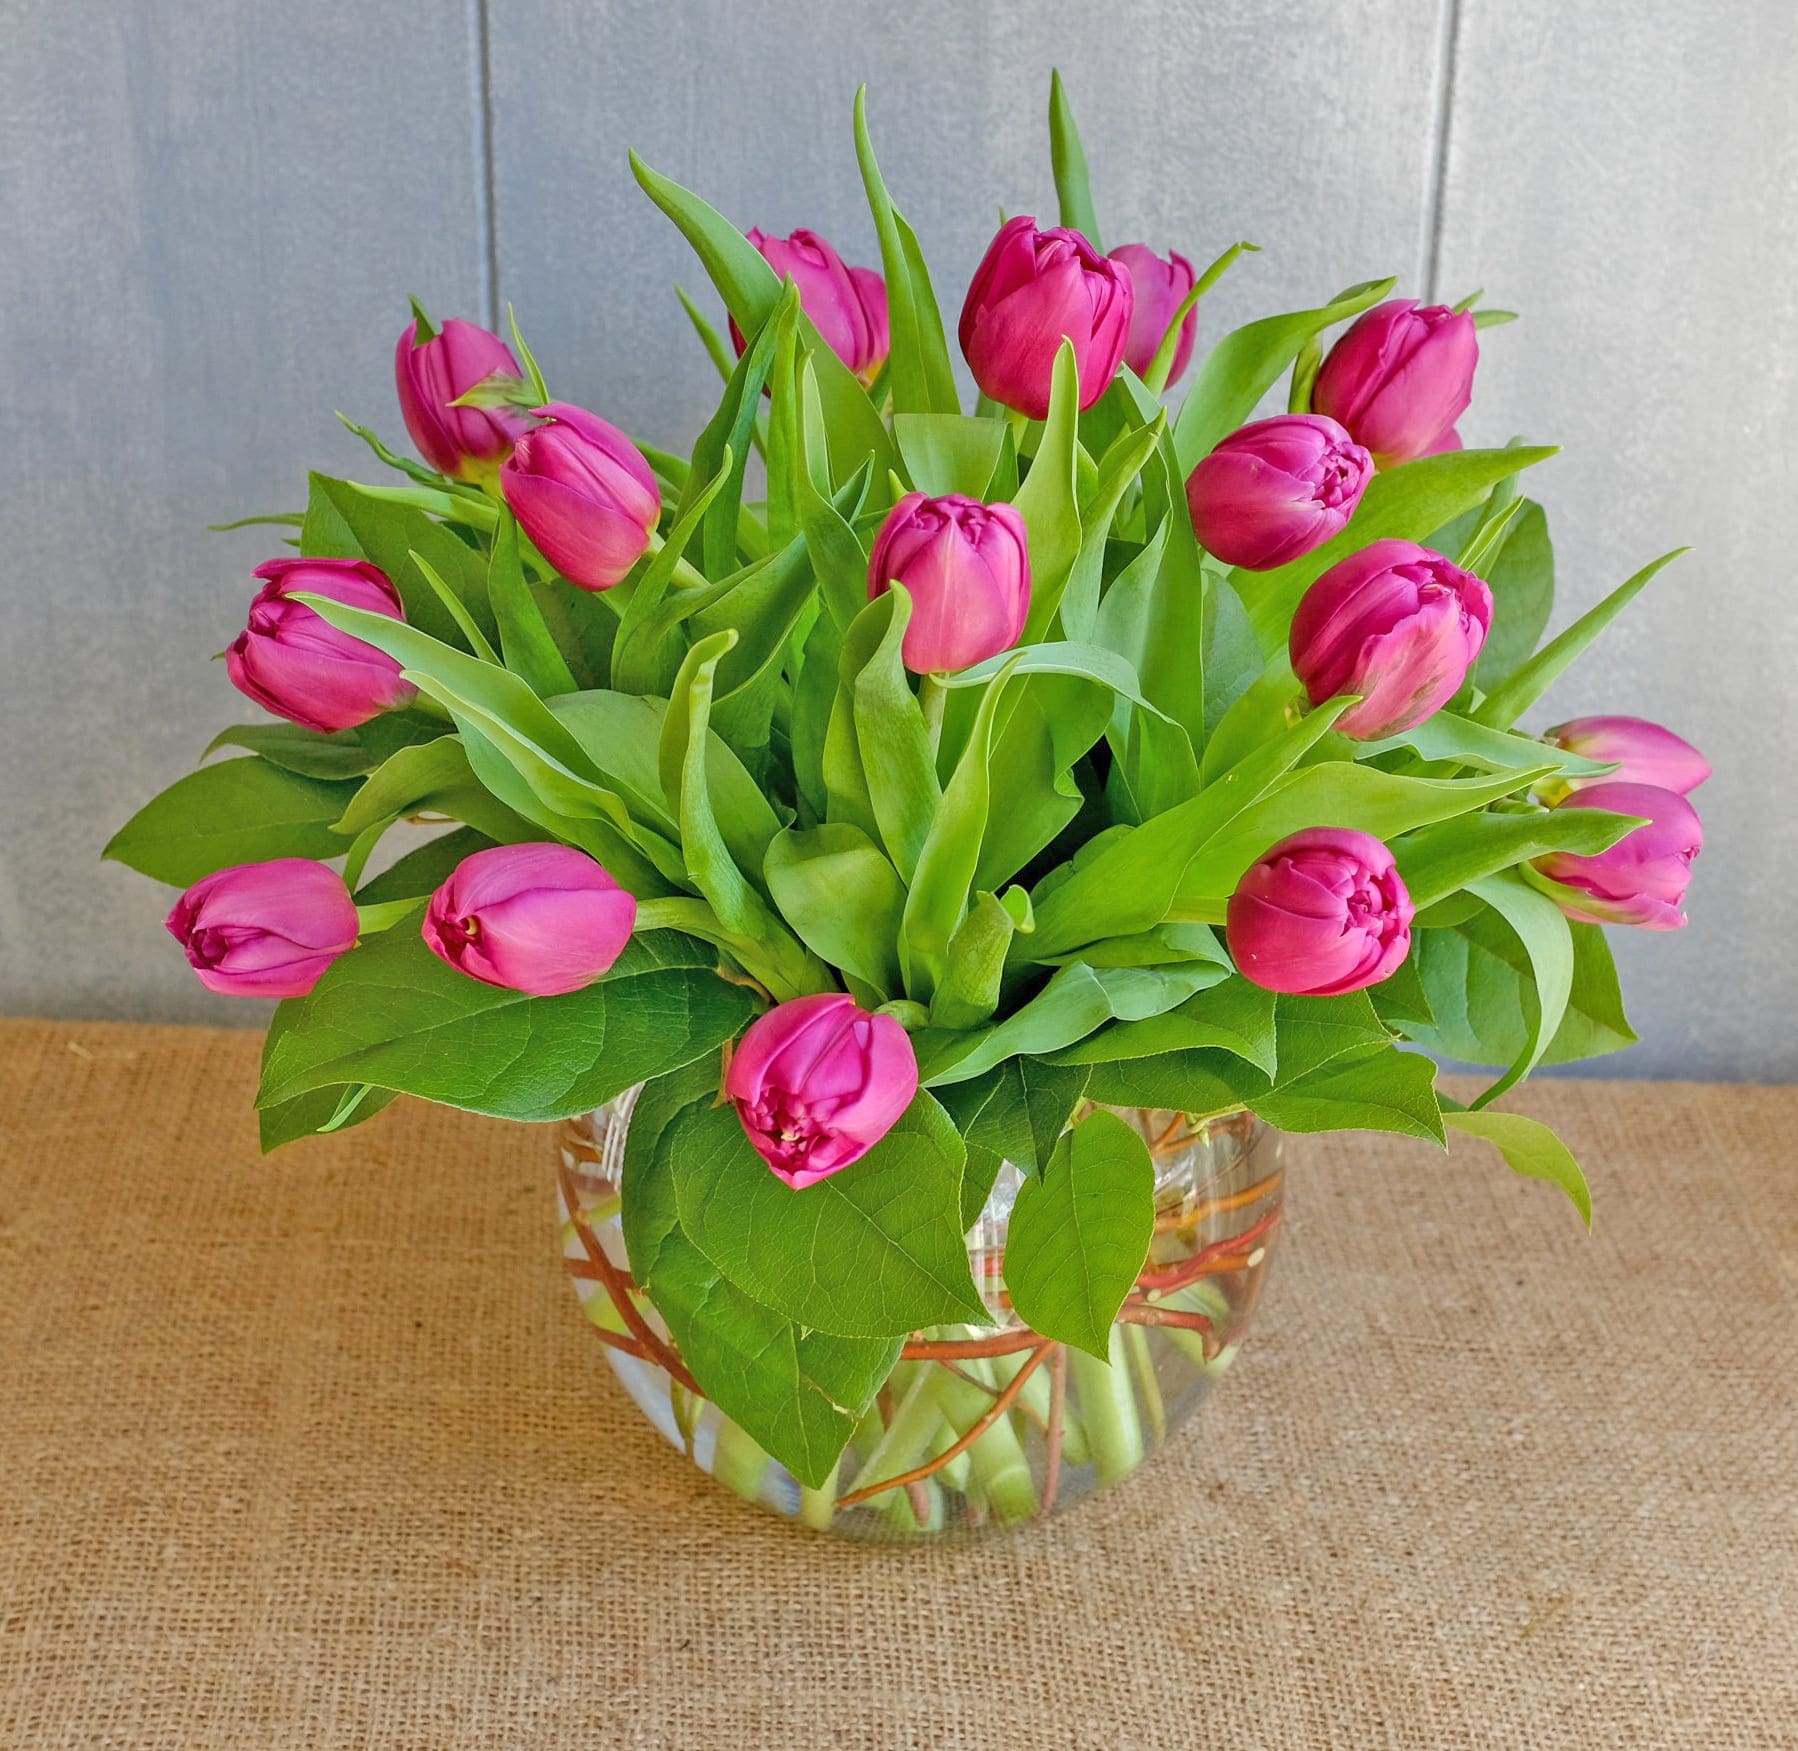 Tulips in a Bubble - Tulip blossoms are a sure sign that Spring is on its way. Send this beautiful bouquet of fresh assorted tulips, hand-arranged in a bubble bowl, and bring the timeless beauty of the season to their door. Abundant bouquet of the freshest tulips in assorted colors Hand-designed by our expert florists in a classic clear bubble glass vase tied with raffia; vase measures 6&quot;H Arrangement measures approximately 17&quot;H x 16&quot;W with 15 tulips Our florists hand-design each arrangement, so colors, varieties, and container may vary due to local availability 